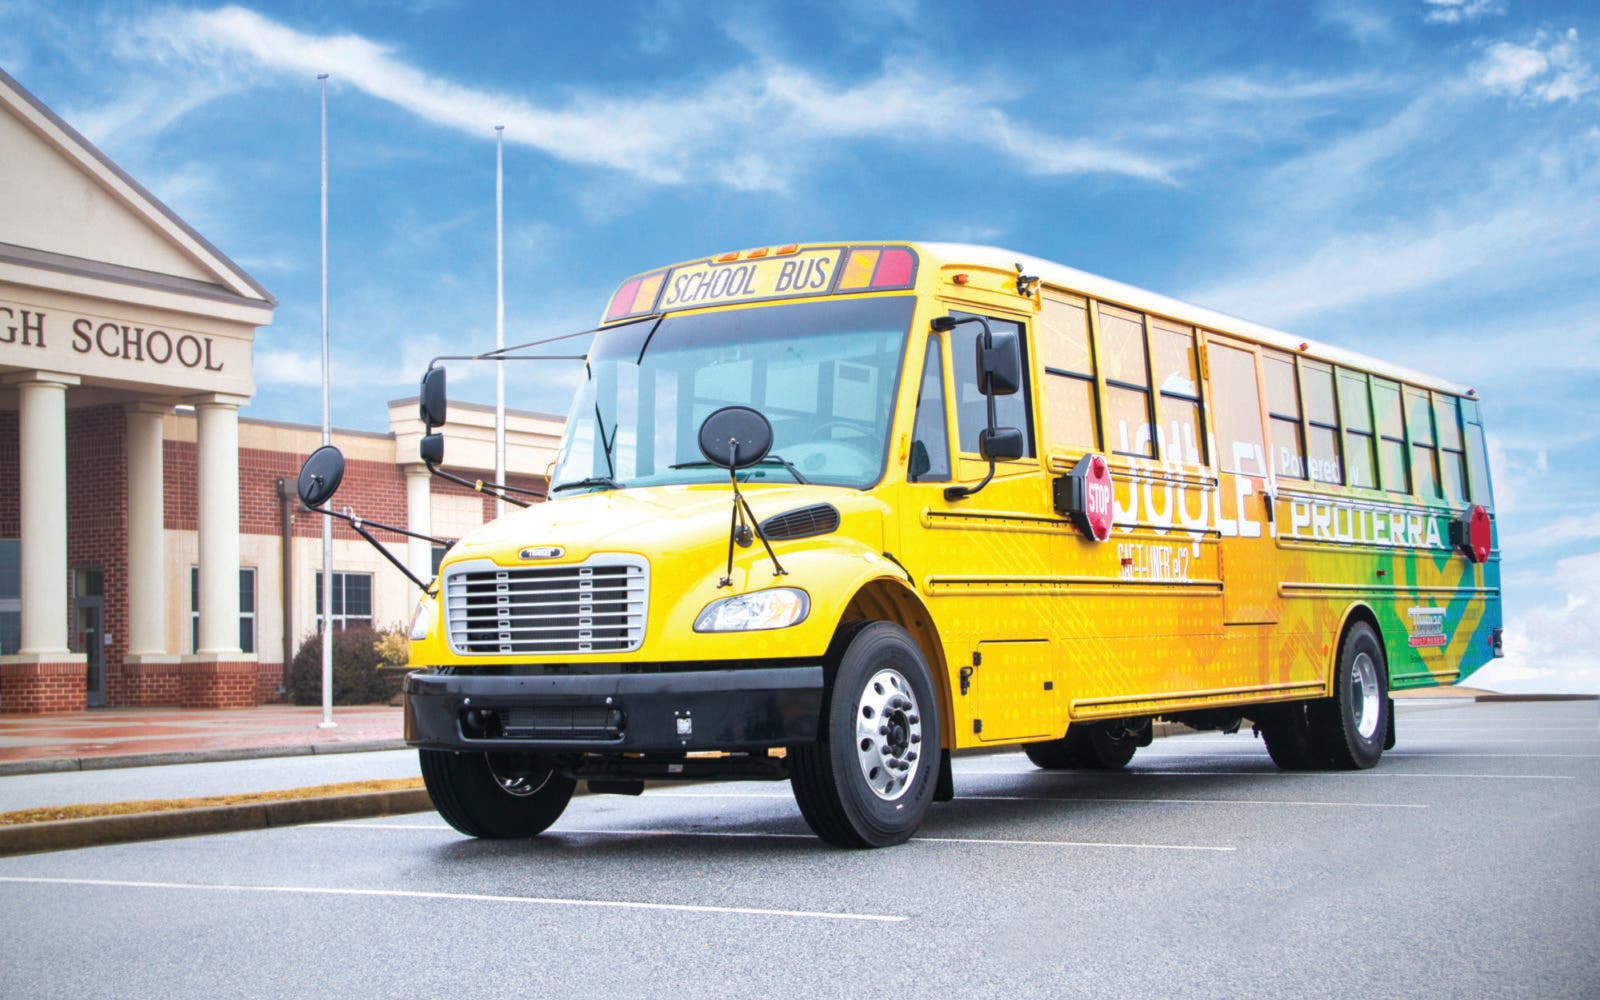 New York City Pledge To Have A Full Electric School Bus Fleet By 2035